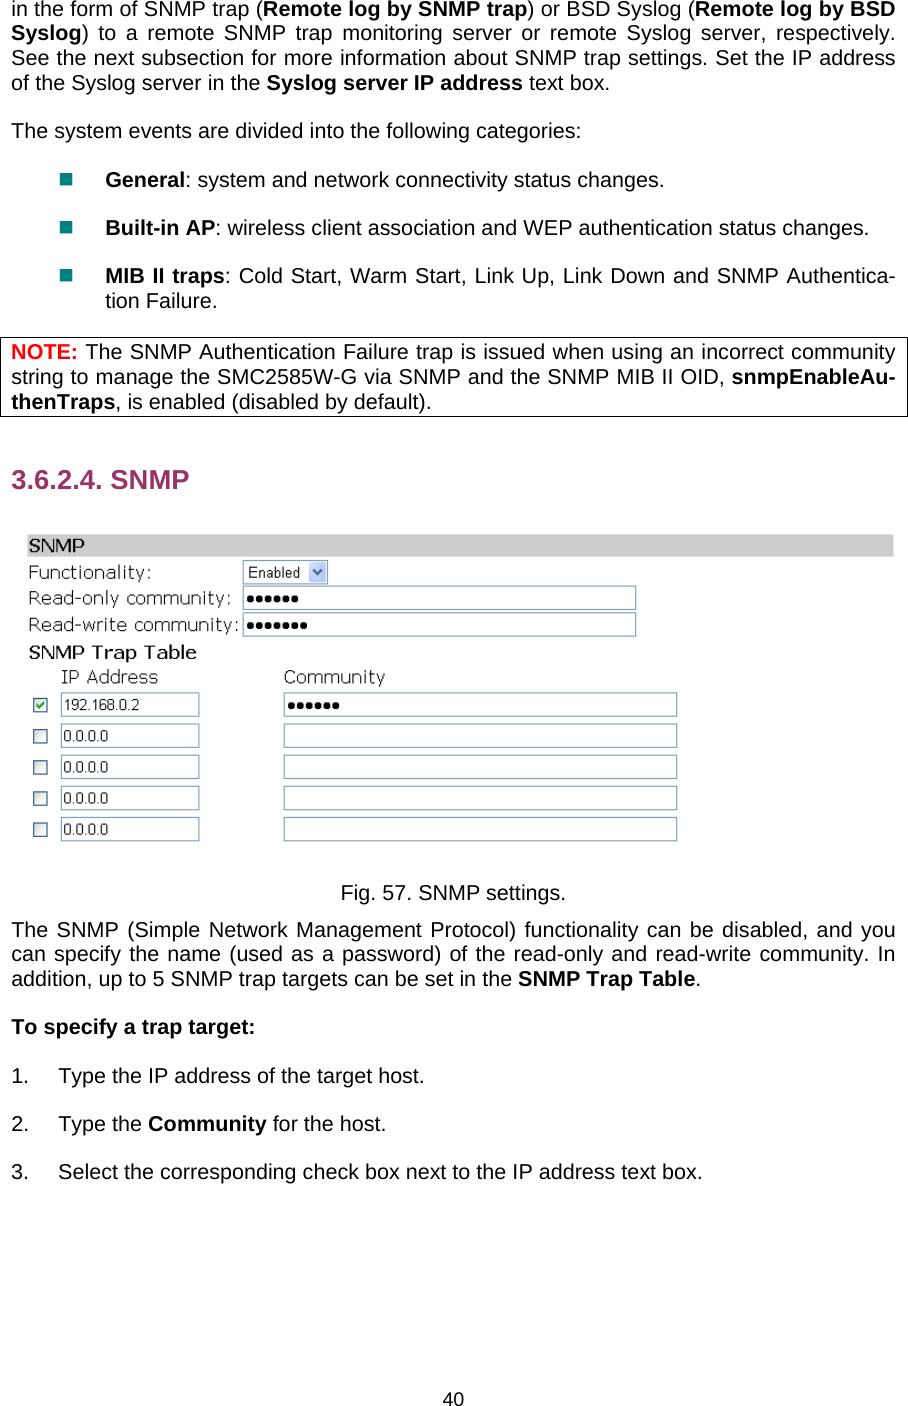   40in the form of SNMP trap (Remote log by SNMP trap) or BSD Syslog (Remote log by BSD Syslog) to a remote SNMP trap monitoring server or remote Syslog server, respectively. See the next subsection for more information about SNMP trap settings. Set the IP address of the Syslog server in the Syslog server IP address text box. The system events are divided into the following categories:  General: system and network connectivity status changes.  Built-in AP: wireless client association and WEP authentication status changes.  MIB II traps: Cold Start, Warm Start, Link Up, Link Down and SNMP Authentica-tion Failure. NOTE: The SNMP Authentication Failure trap is issued when using an incorrect community string to manage the SMC2585W-G via SNMP and the SNMP MIB II OID, snmpEnableAu-thenTraps, is enabled (disabled by default). 3.6.2.4. SNMP  Fig. 57. SNMP settings. The SNMP (Simple Network Management Protocol) functionality can be disabled, and you can specify the name (used as a password) of the read-only and read-write community. In addition, up to 5 SNMP trap targets can be set in the SNMP Trap Table. To specify a trap target: 1.  Type the IP address of the target host. 2. Type the Community for the host. 3.  Select the corresponding check box next to the IP address text box. 